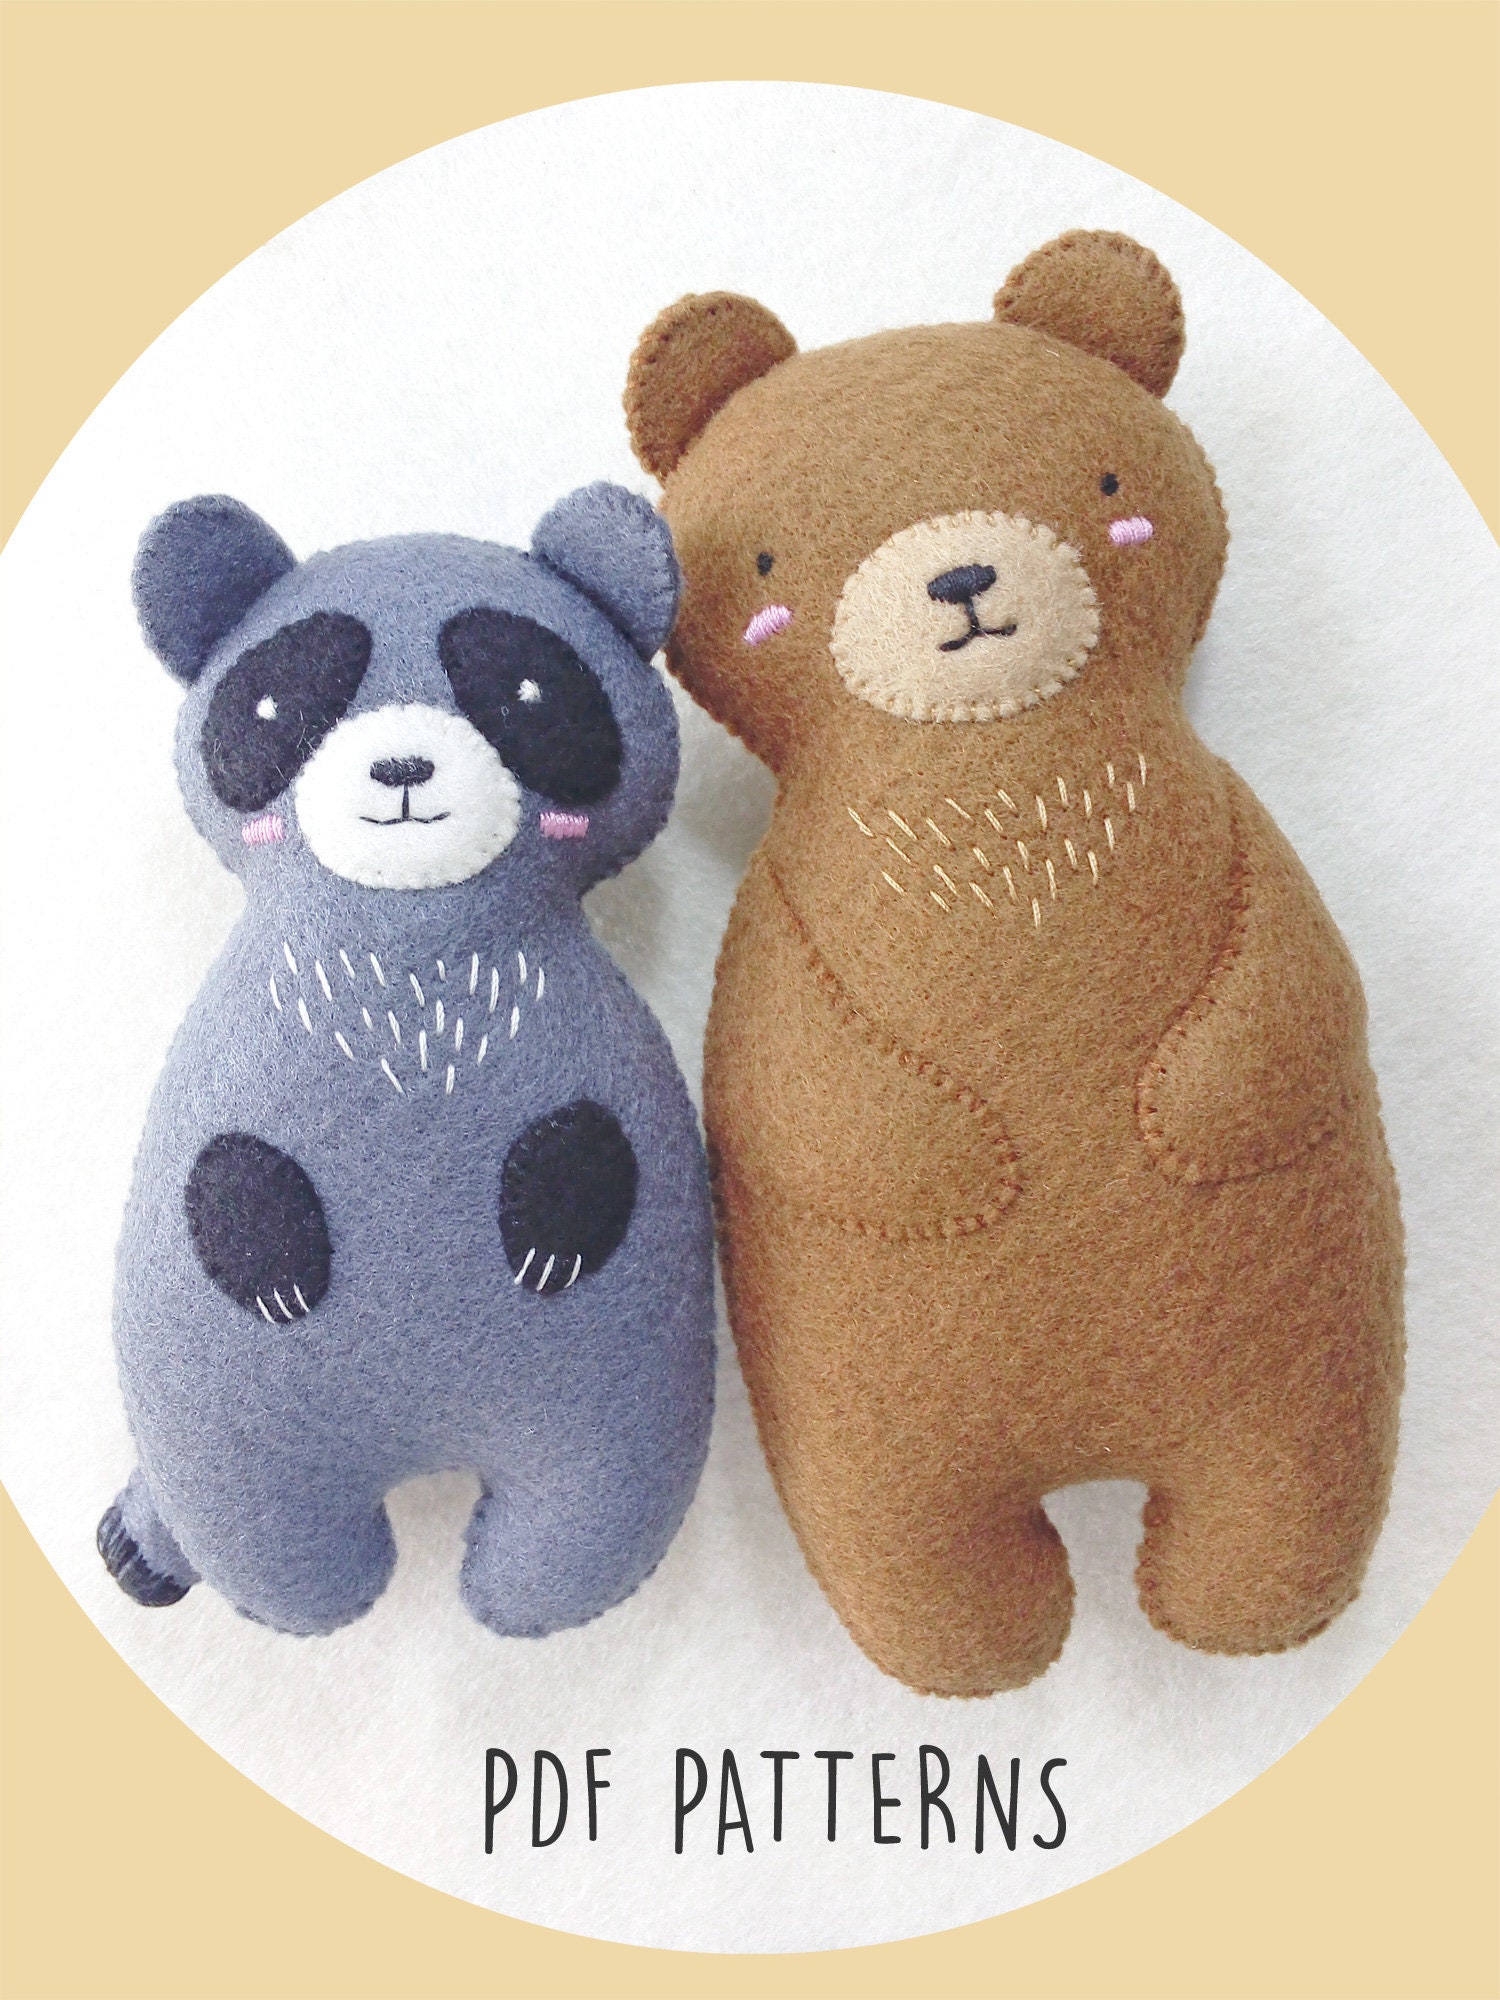 Mums and Babies Stuffed Animal Sewing Patterns, Felt Hand Sewing